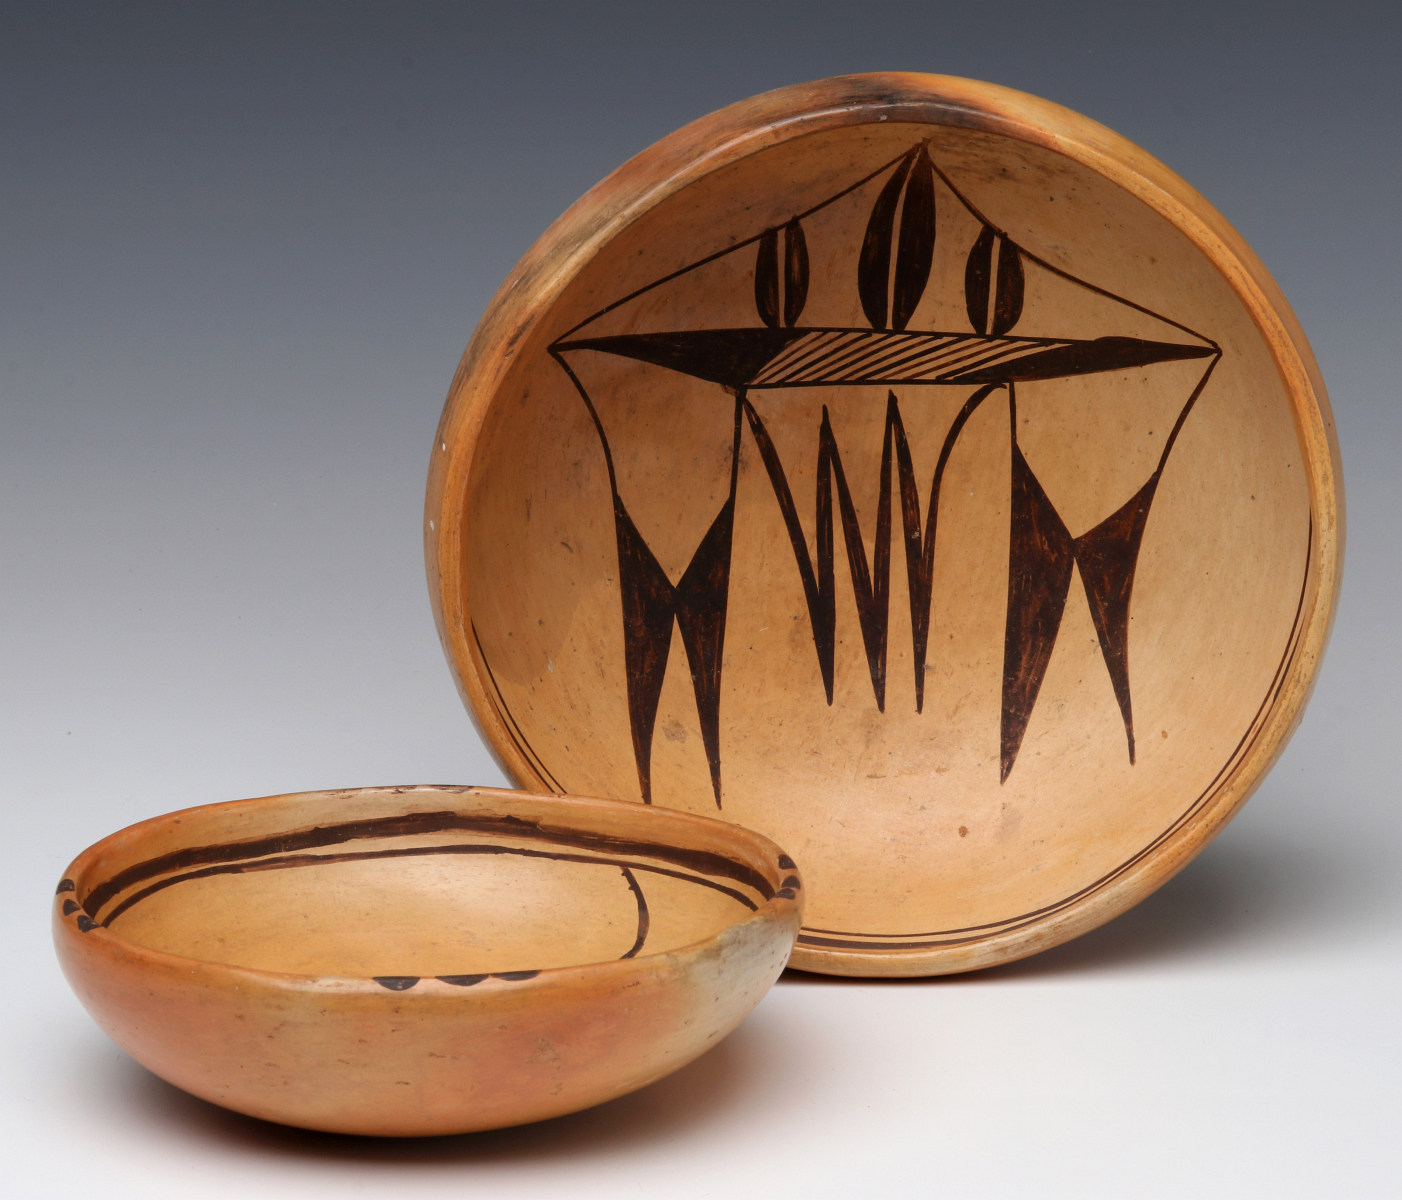 TWO EARLY 20TH CENTURY HOPI INDIAN POTTERY BOWLS